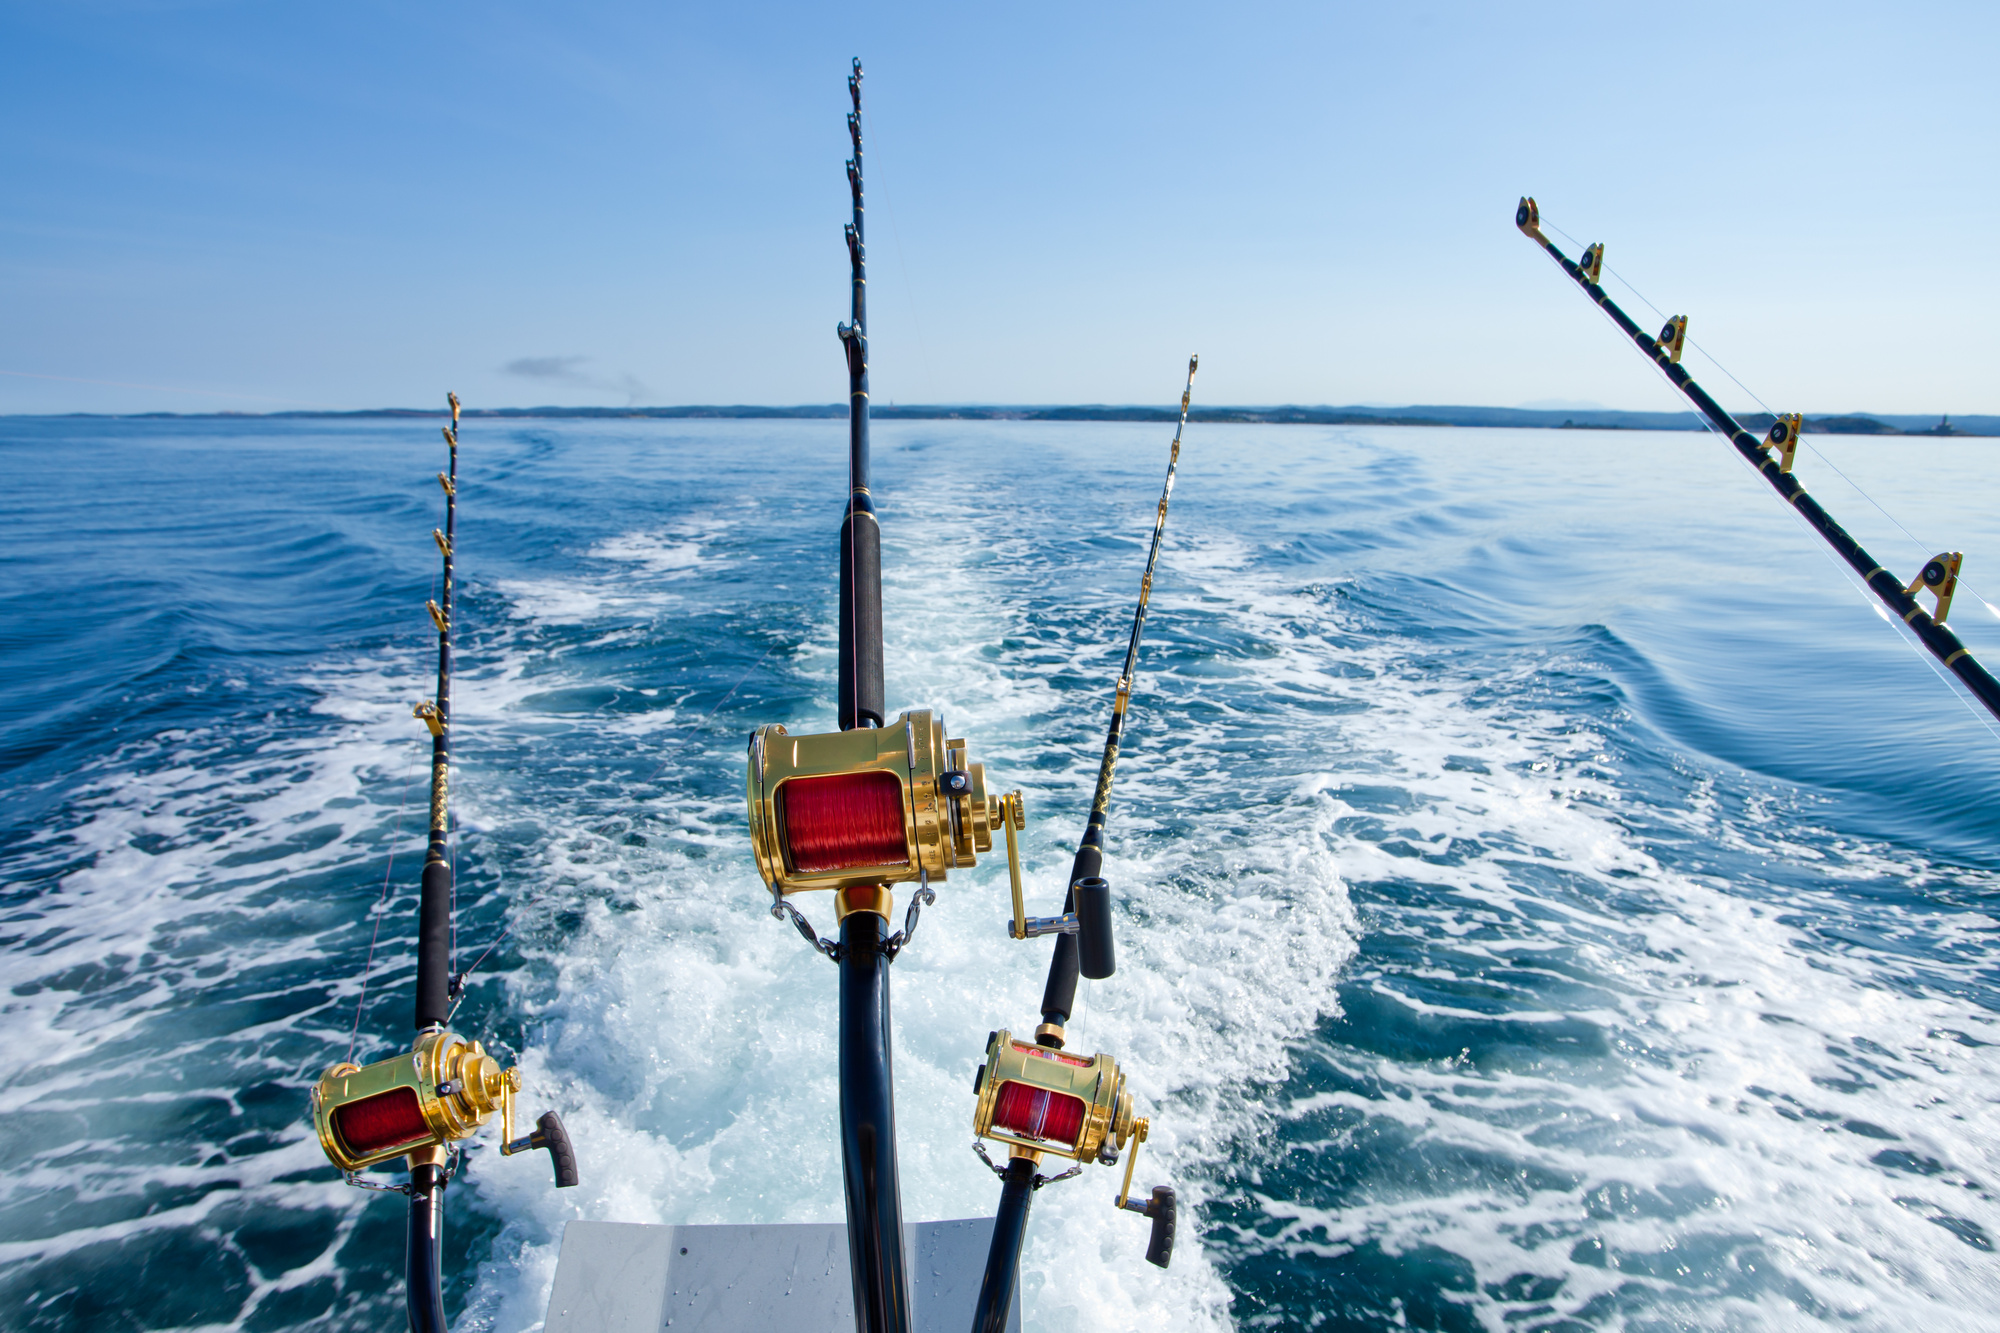 Looking to Hire a Boat? Here's a Guide to Fishing Charters